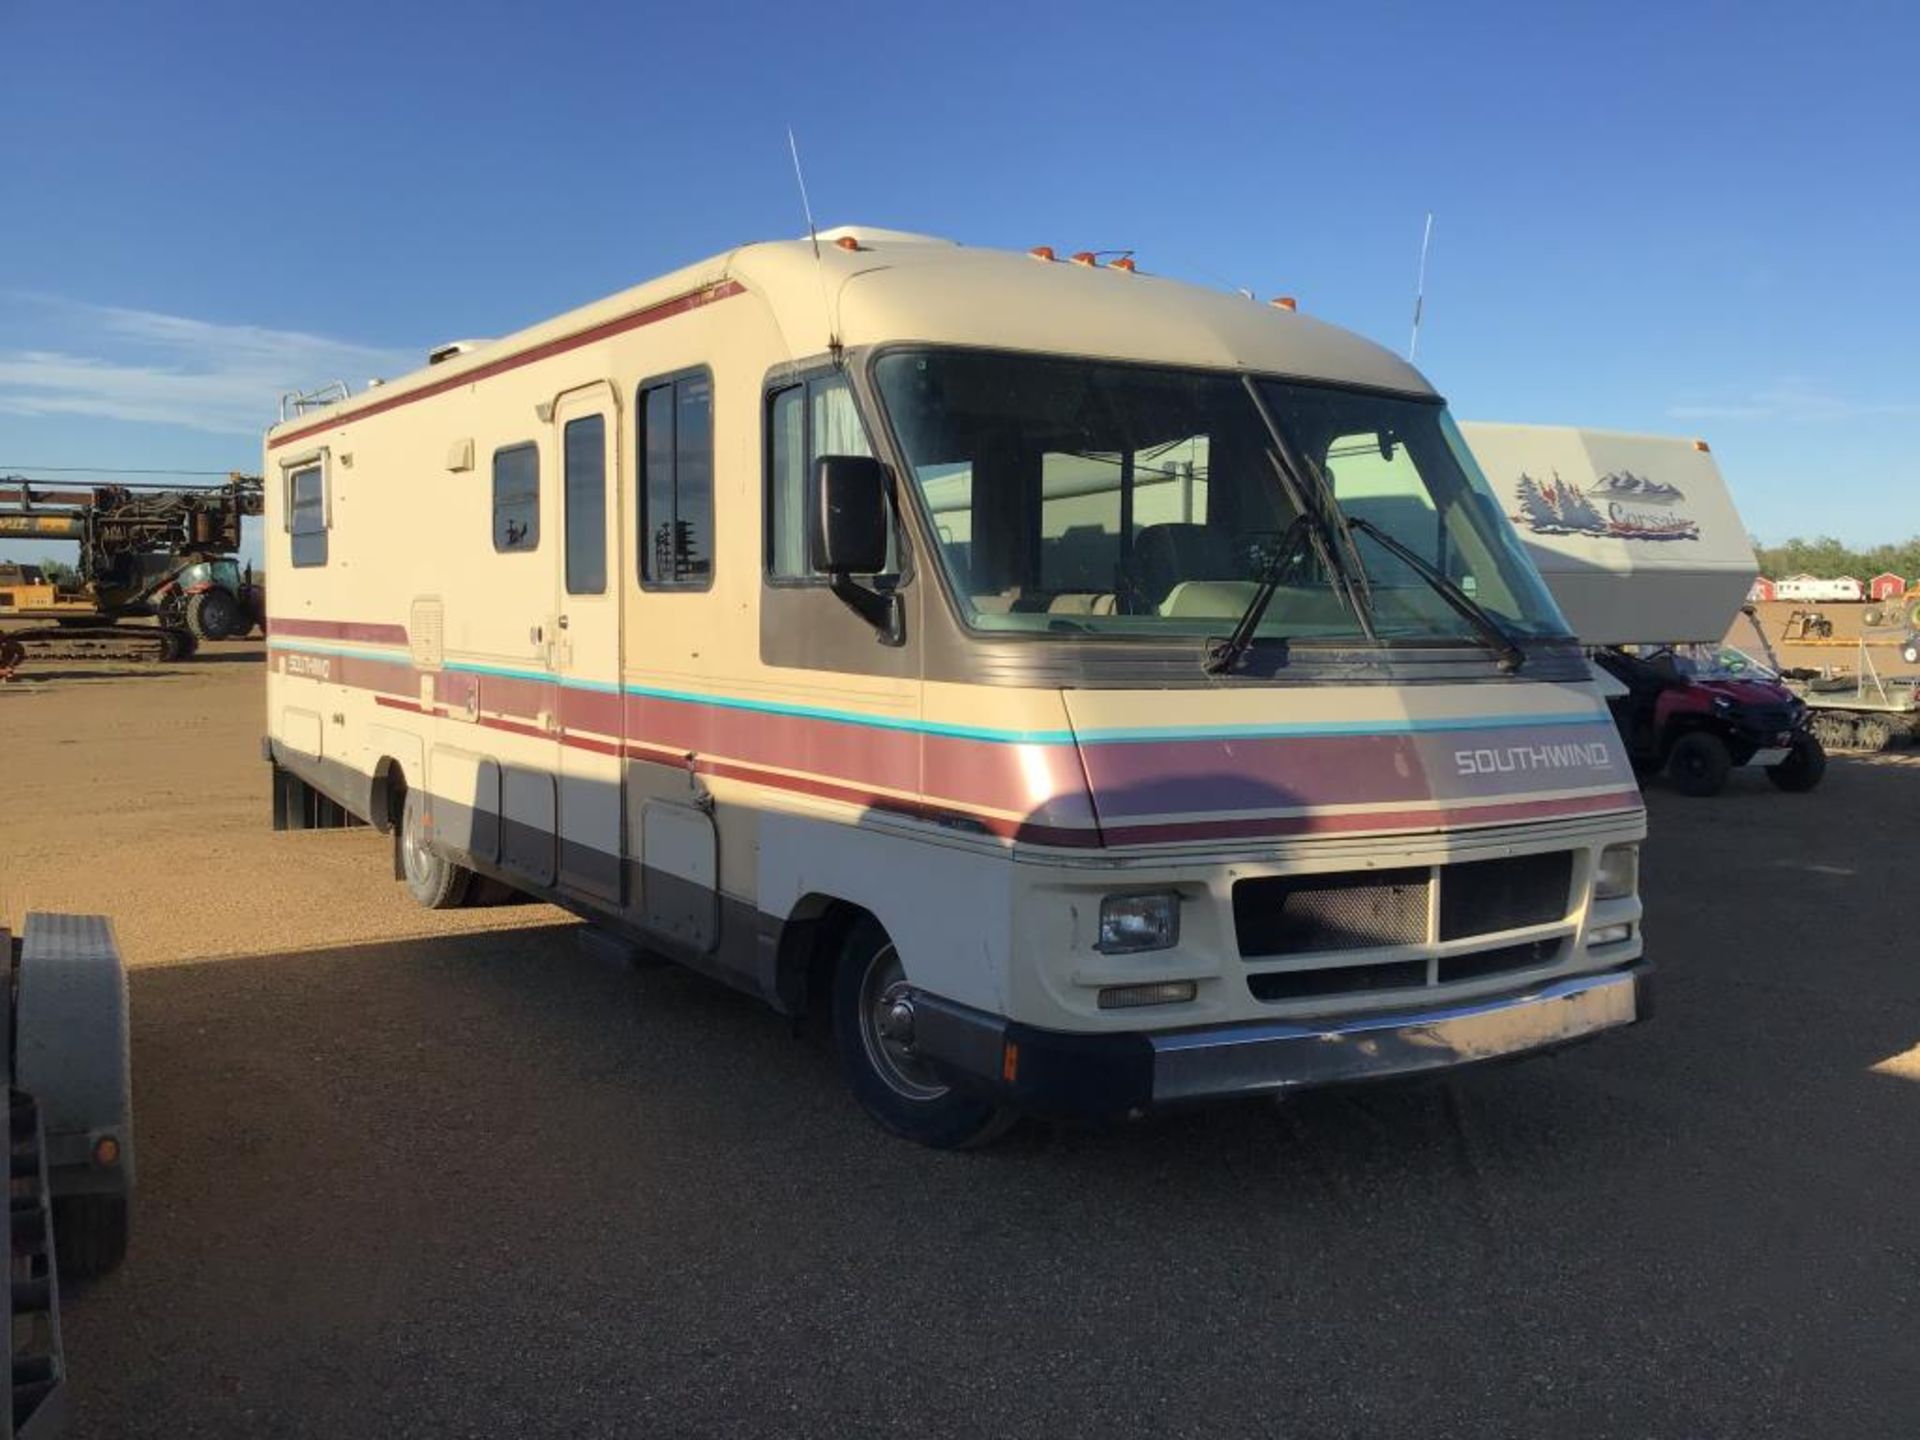 1990 Southwind Chevy 36ft Motorhome - Image 2 of 16